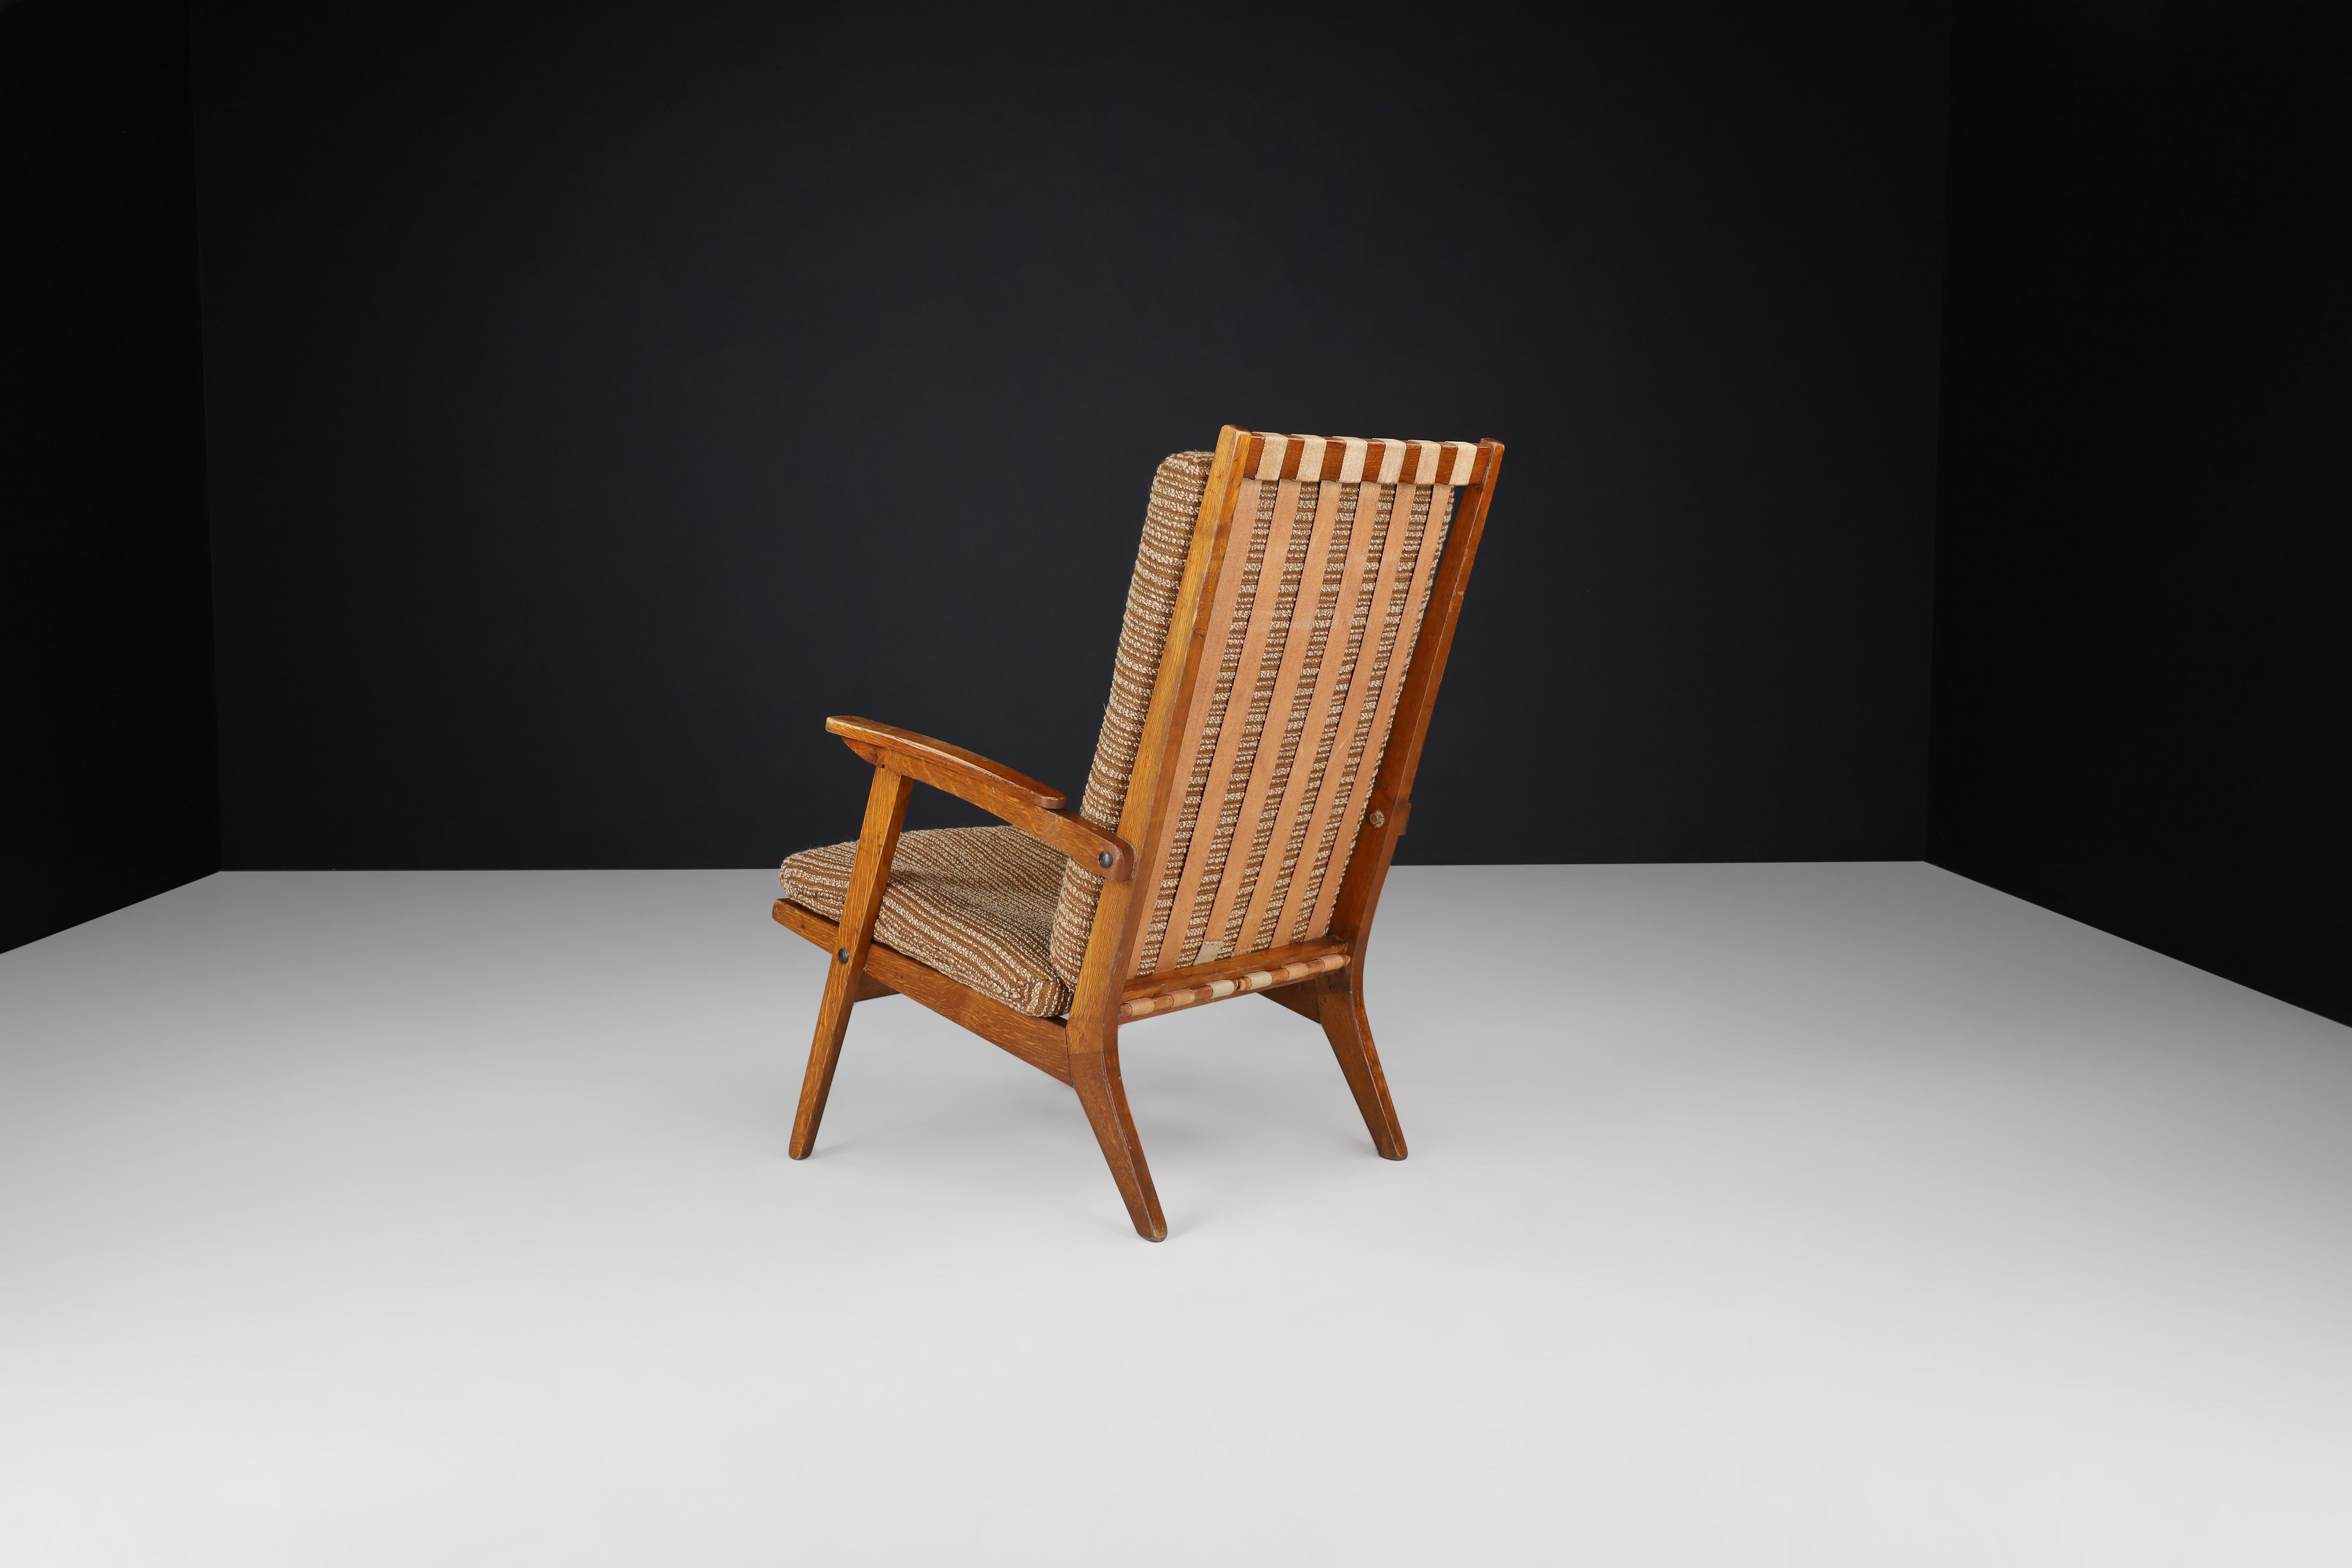 Oak Sculptural Lounge Chairs with Brown Upholstery, France, 1950s For Sale 7